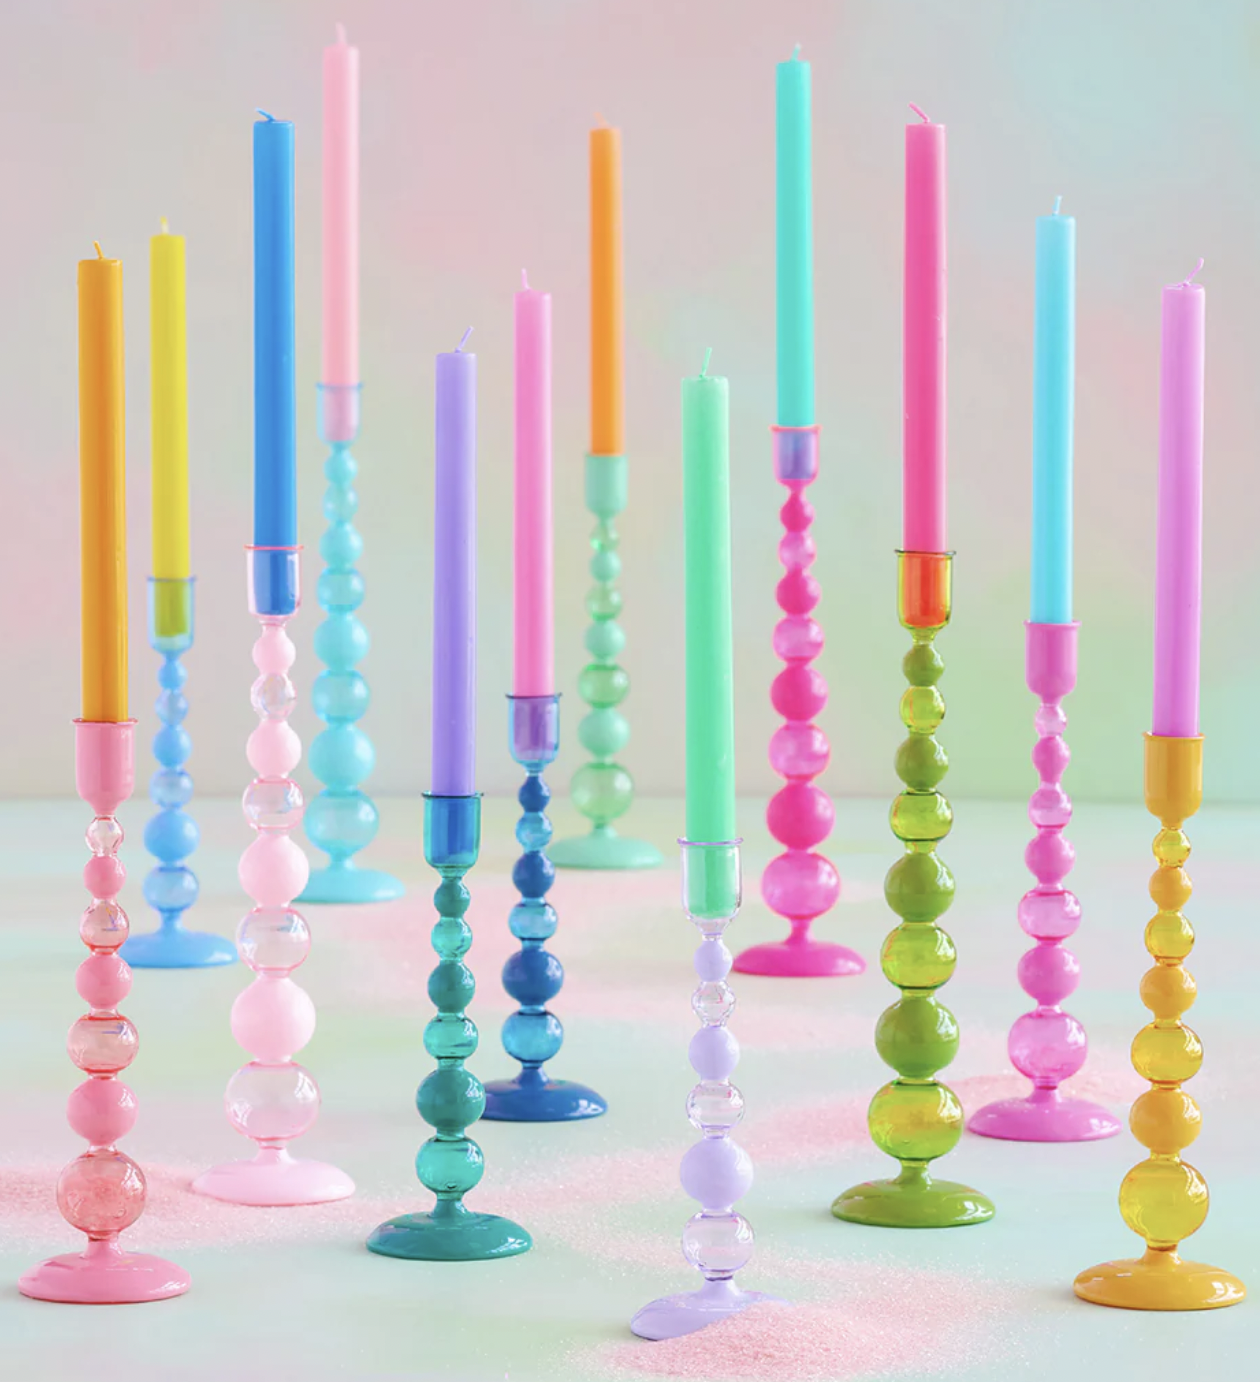 S/3 Bubble Candle